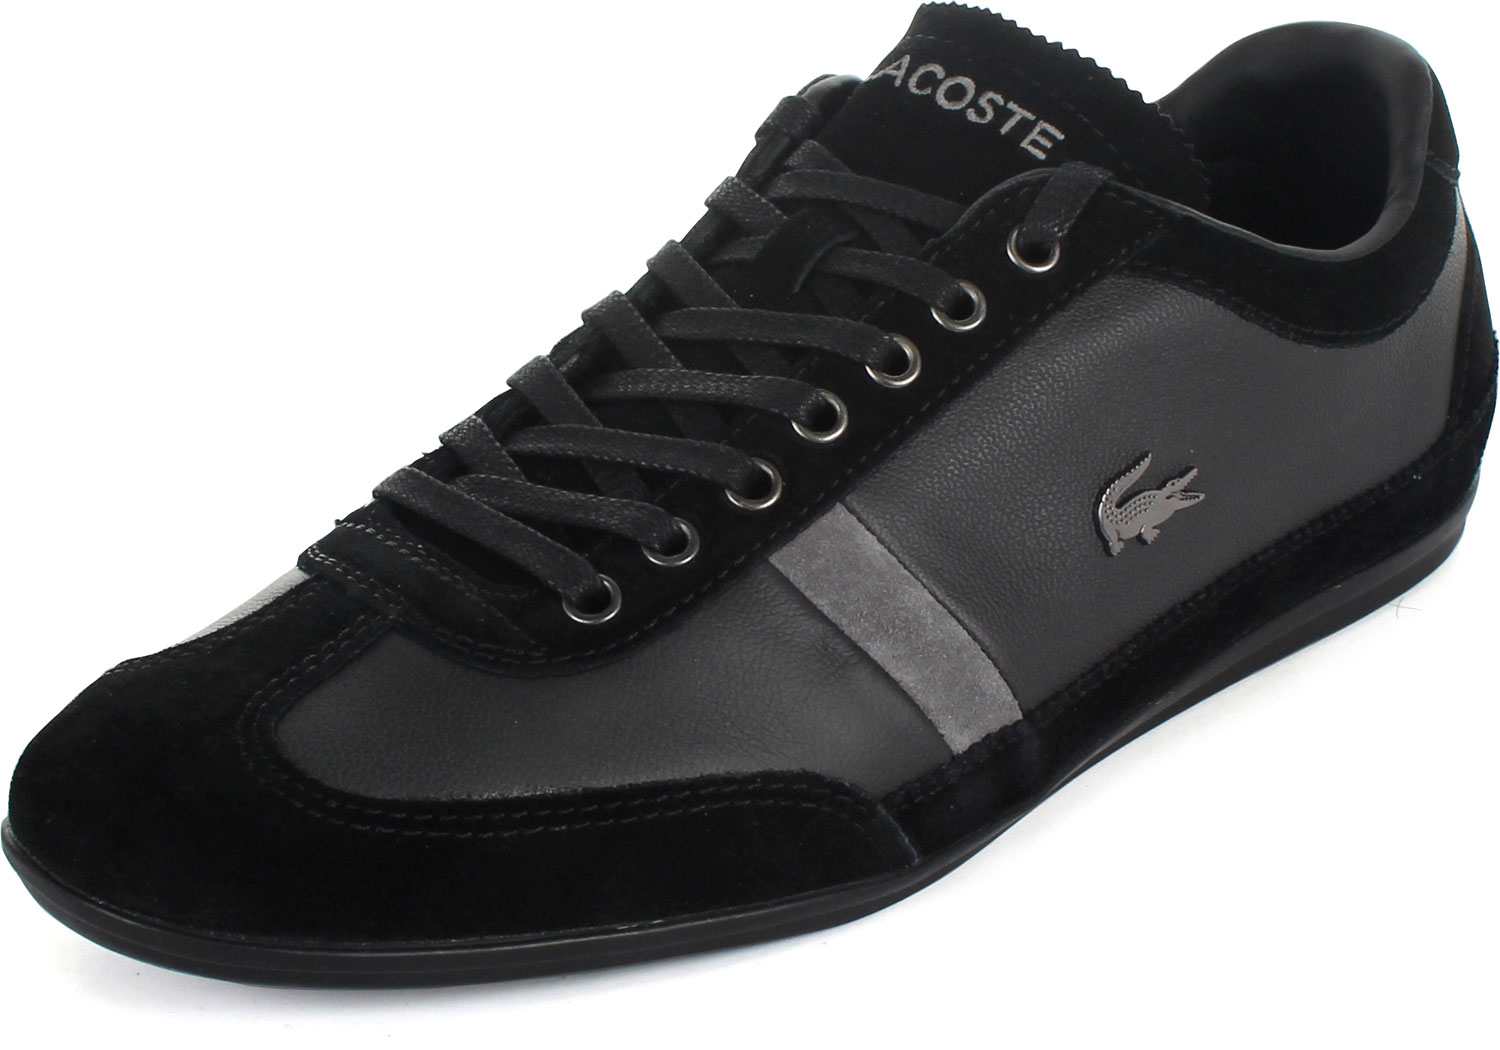 Lacoste - Mens Misano 22 LCR Shoes | eBay